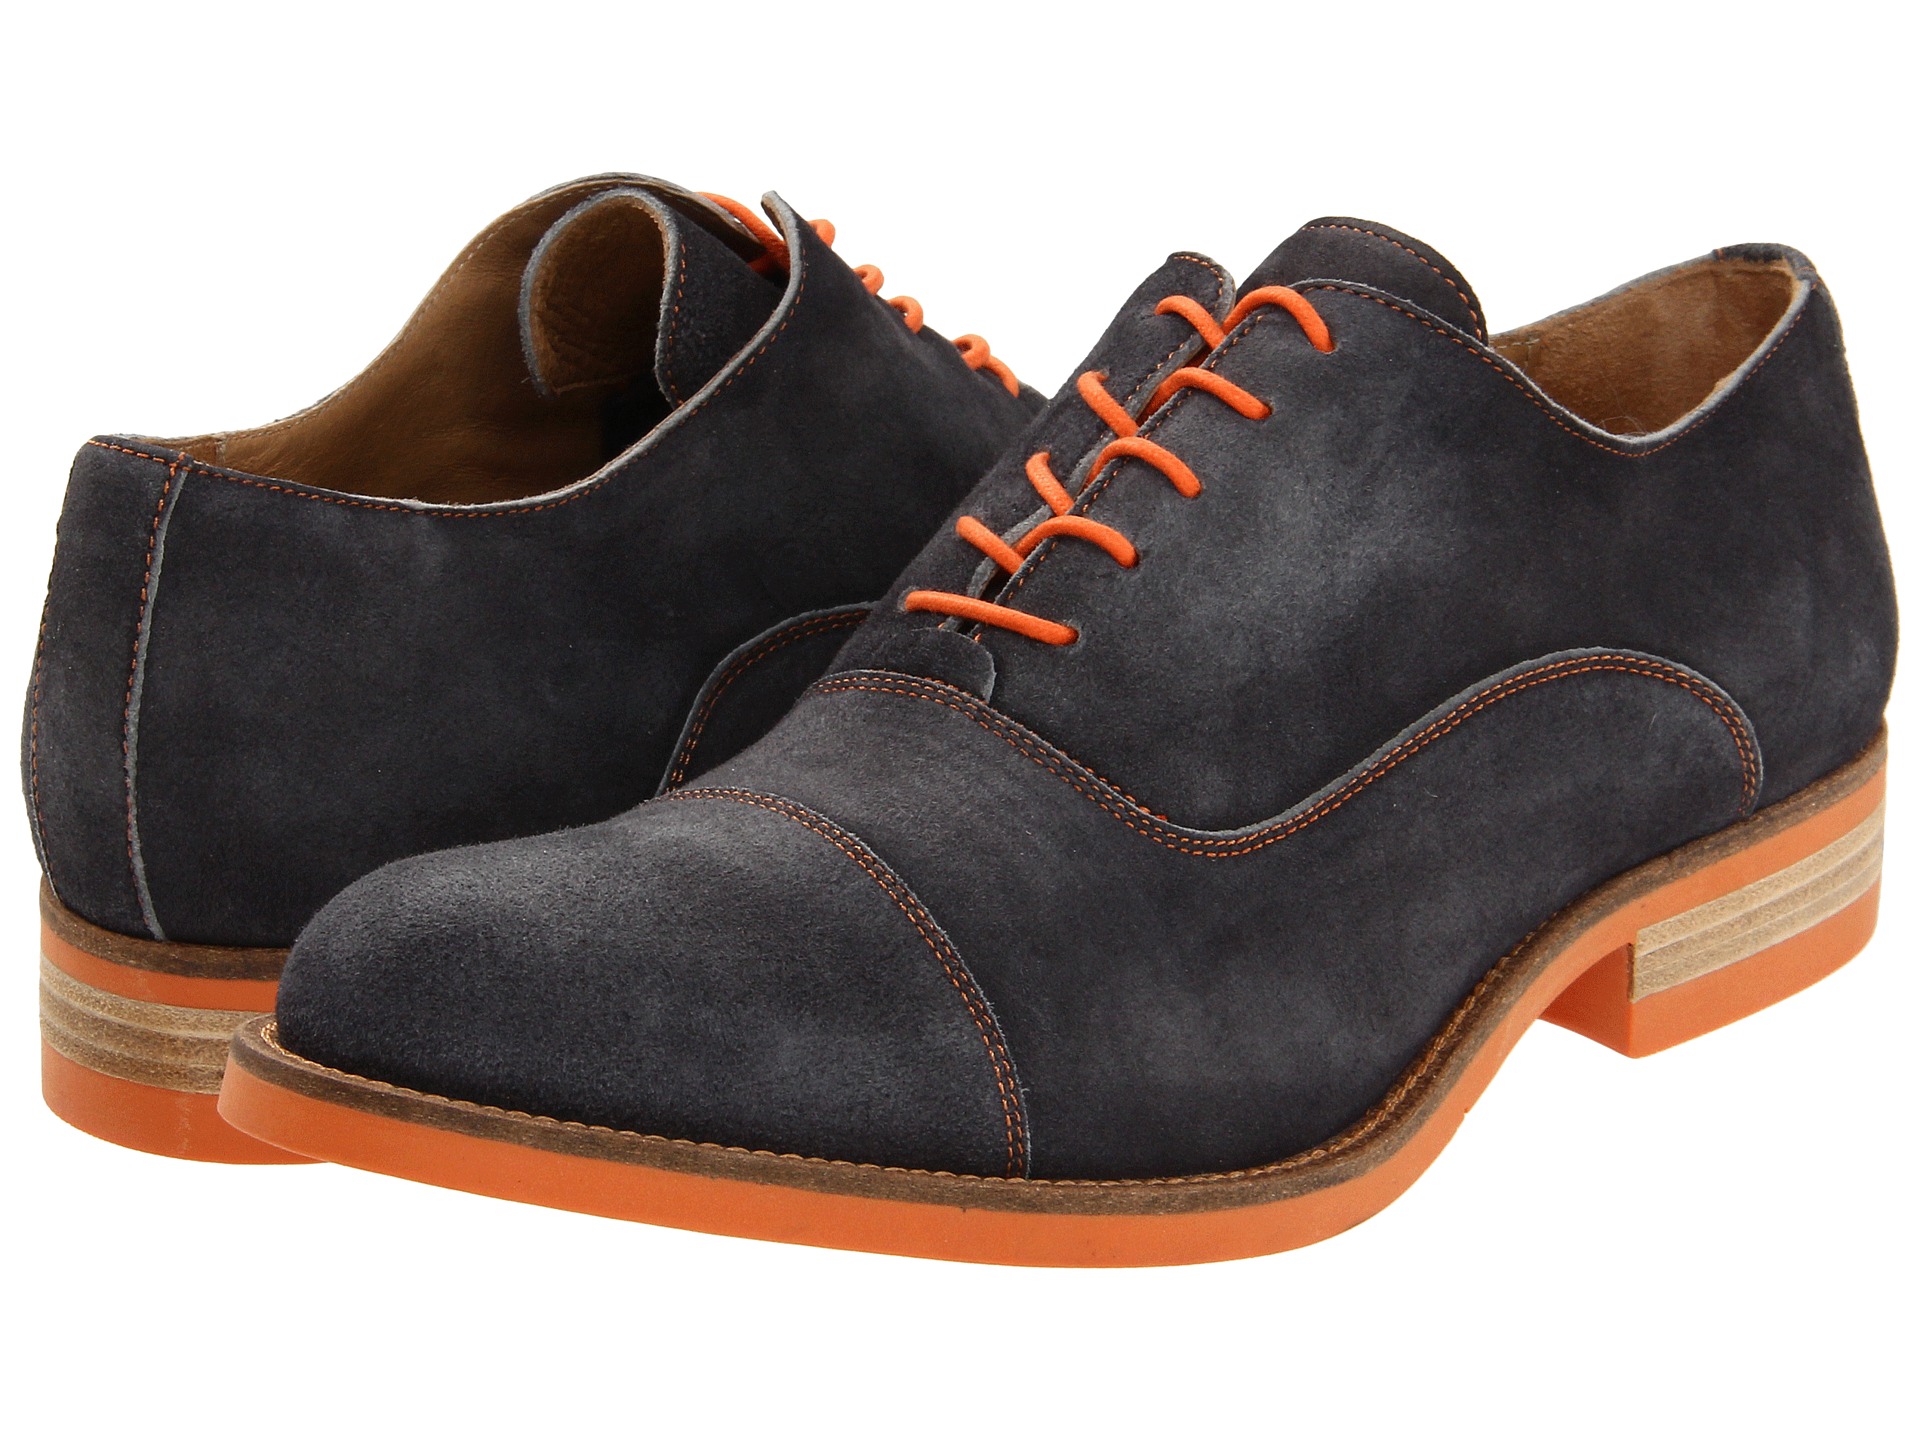 suede oxfords and Shoes” 9